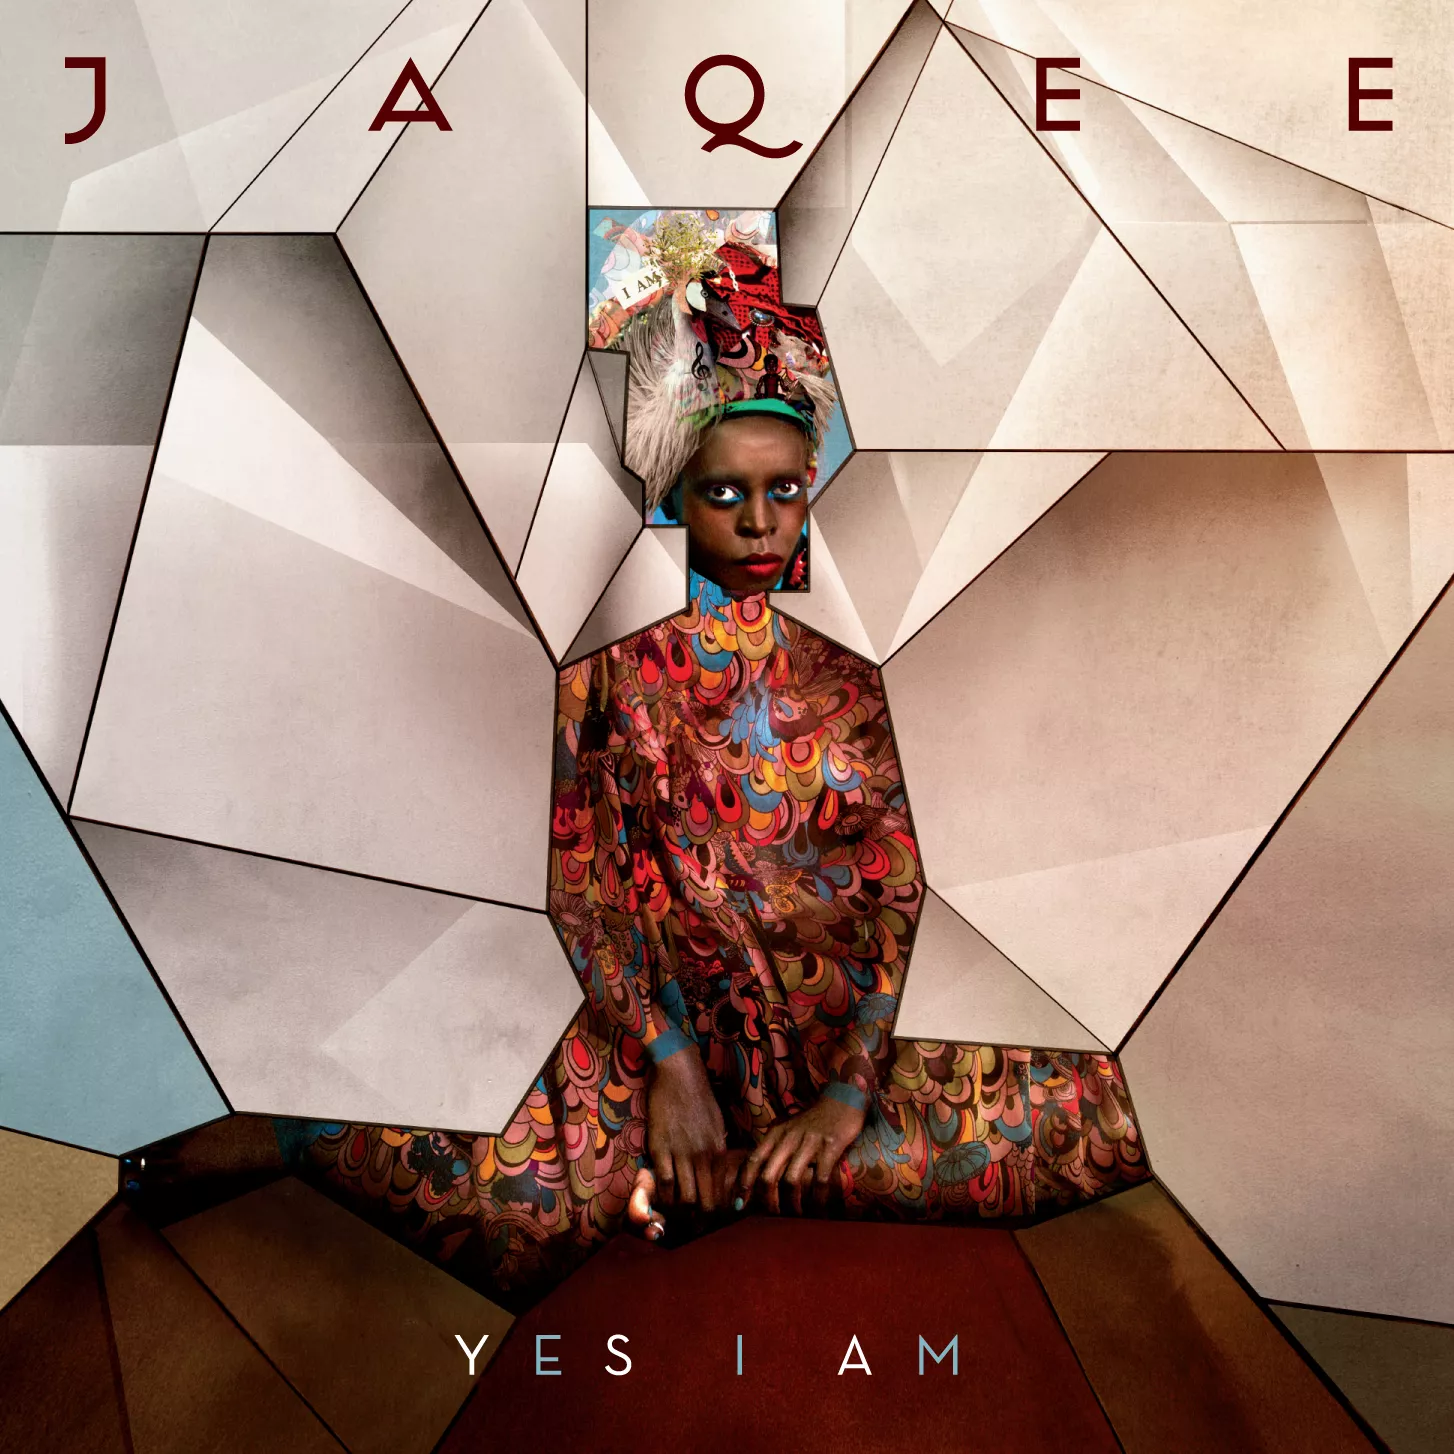 Yes I Am - Jaqee